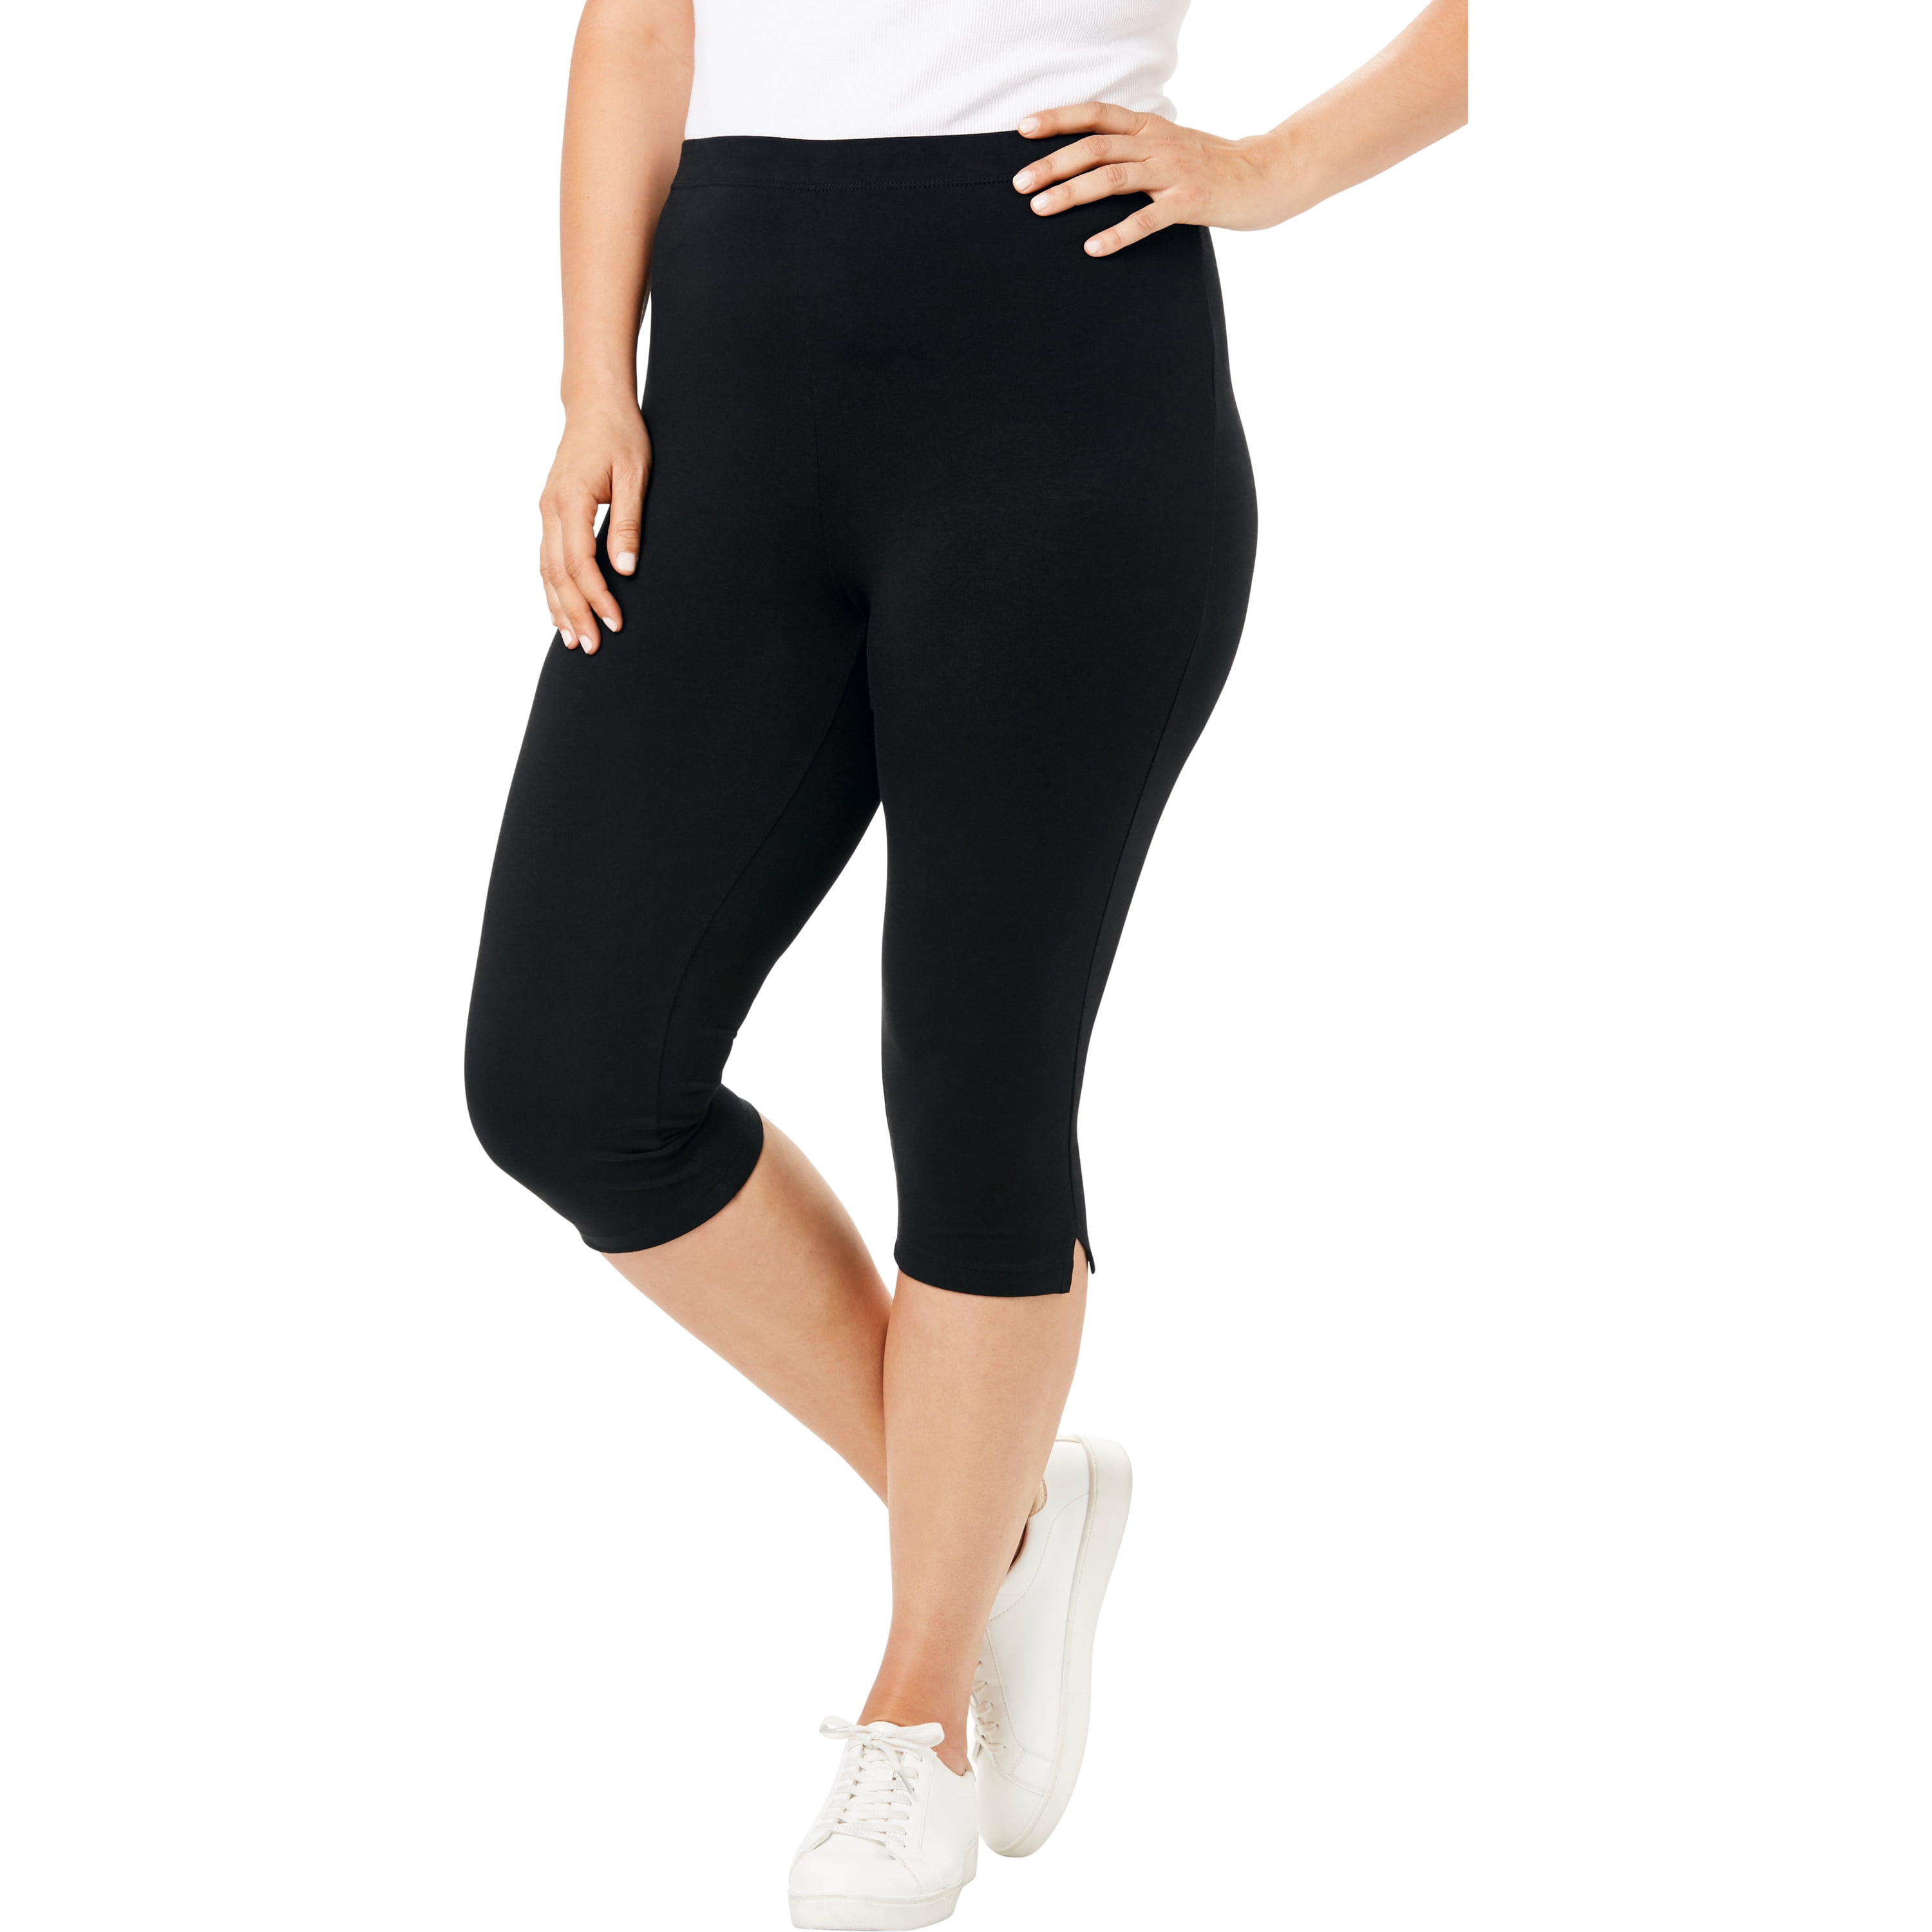 Woman Within - Woman Within Women's Plus Size Petite Stretch Cotton ...